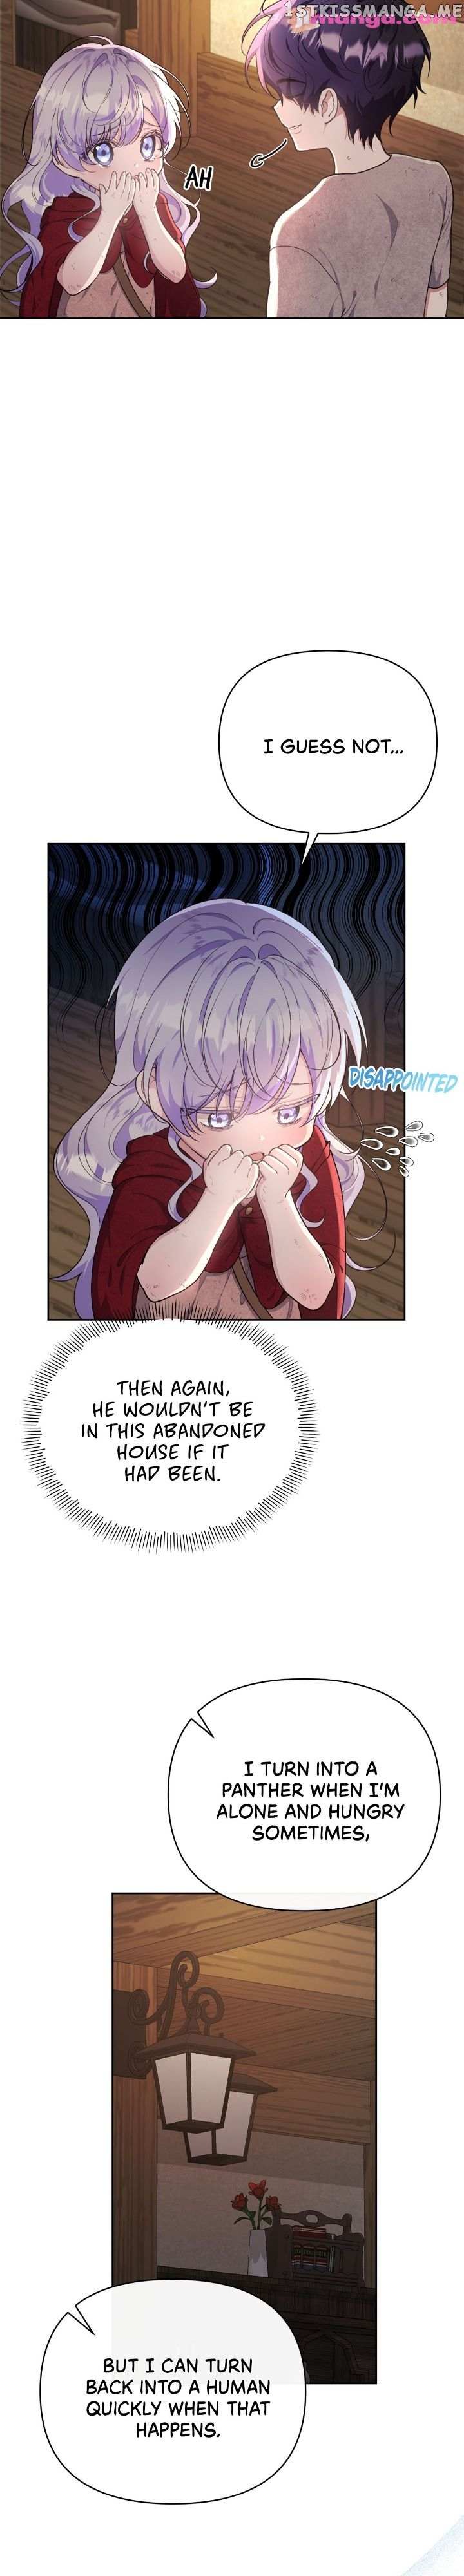 When The Witch’S Daughter Lifts The Male Lead’S Curse - Page 2